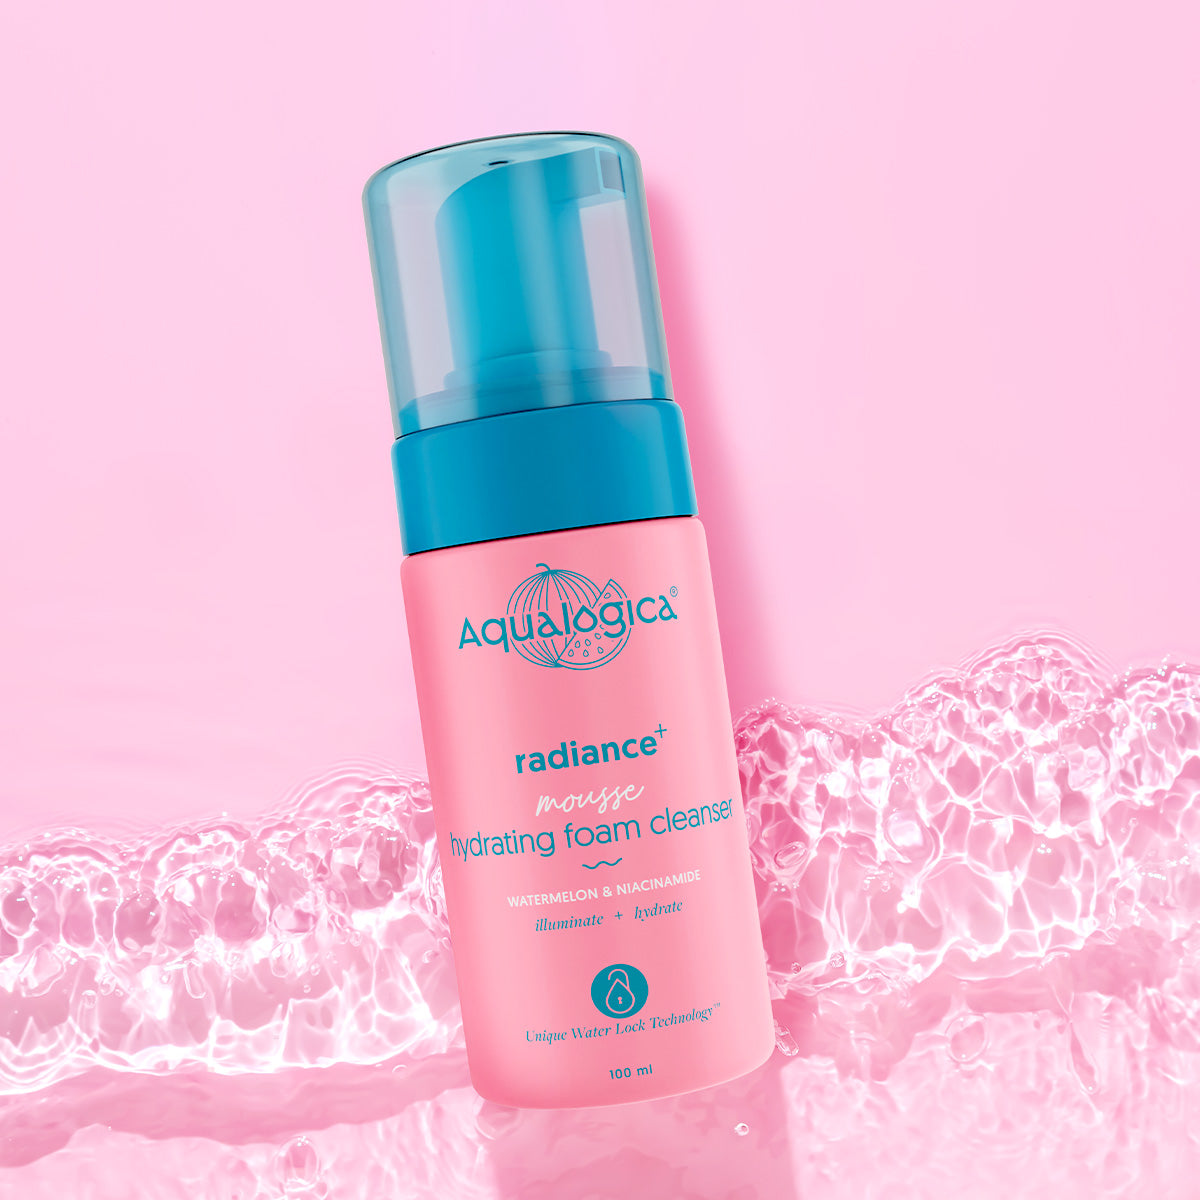 Radiance+ Mousse Hydrating Foam Cleanser - 100 ml